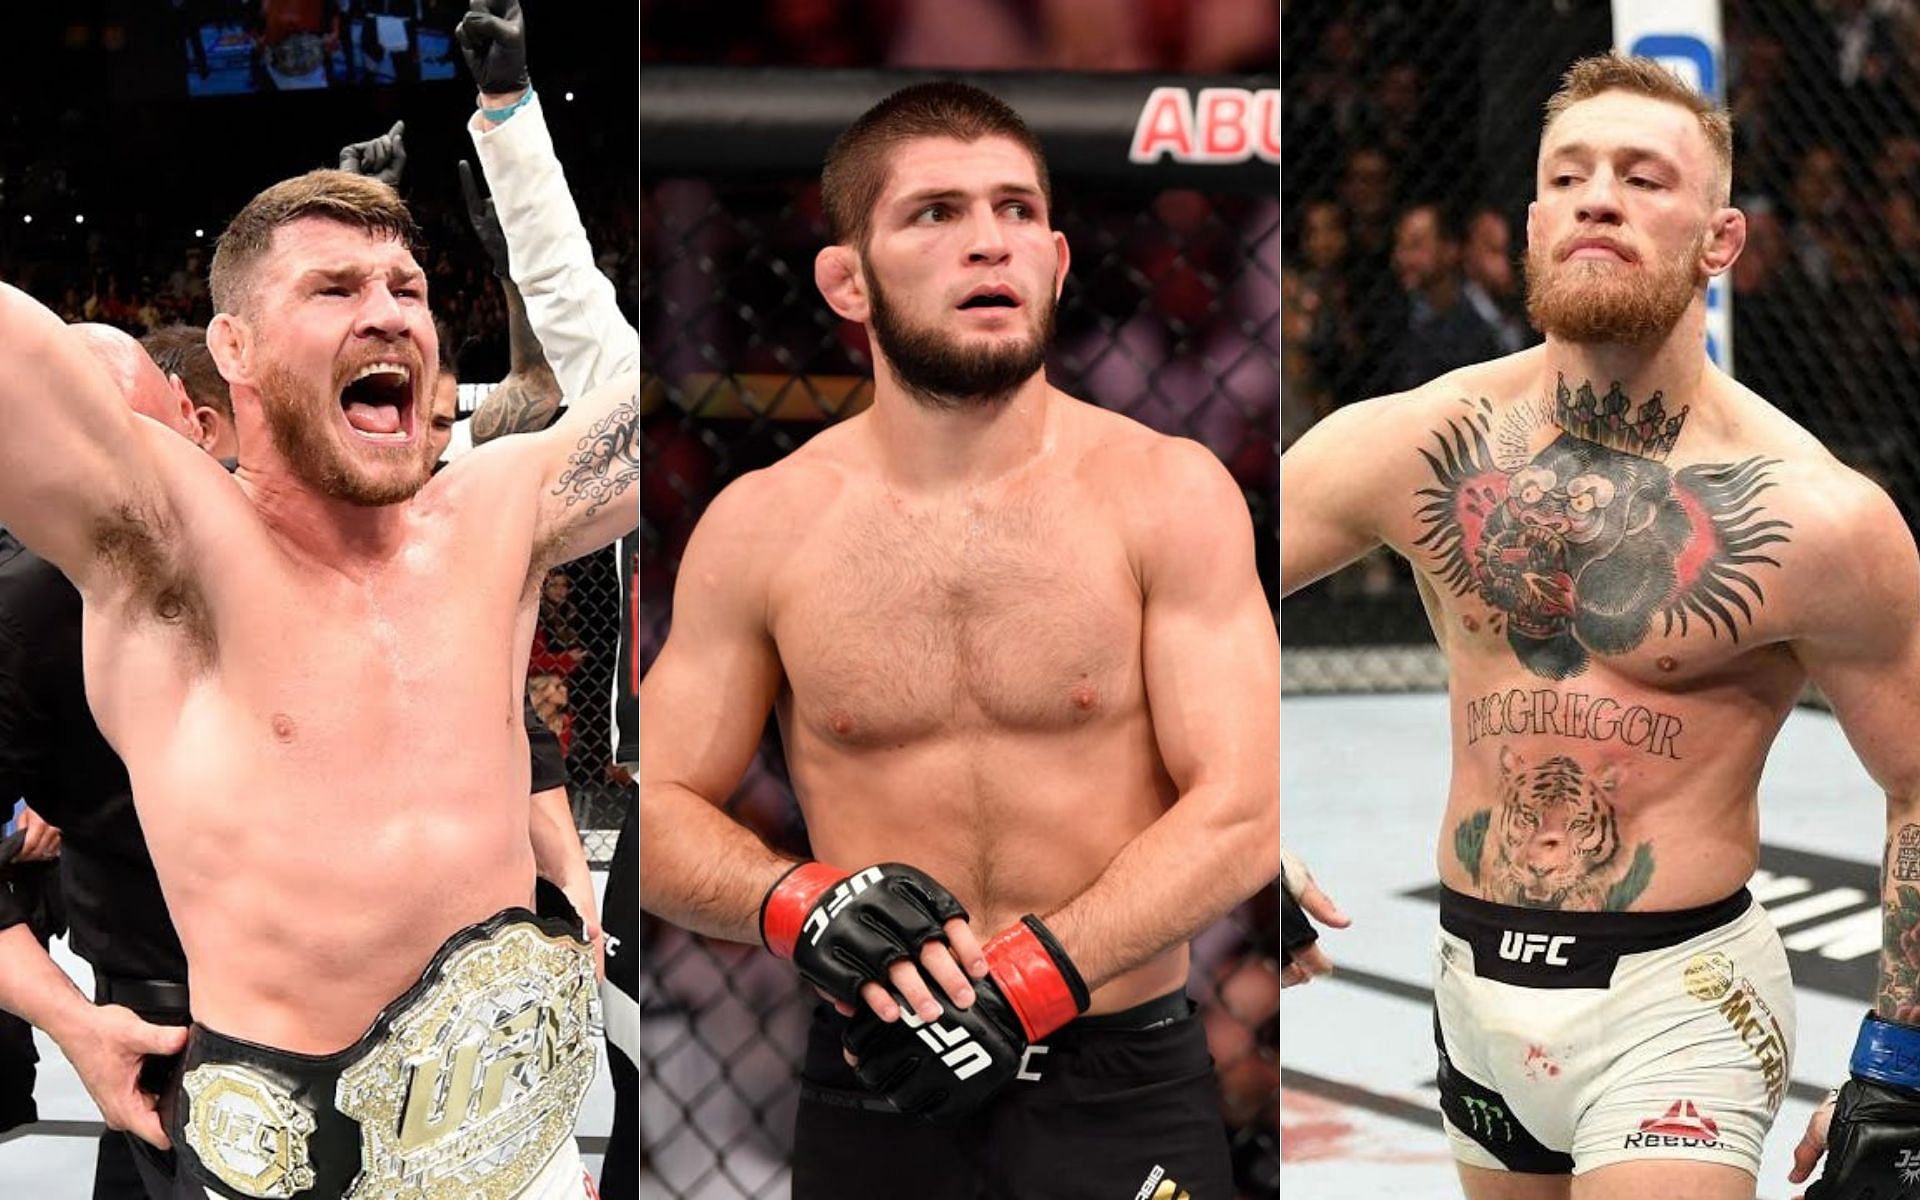 Michael Bisping, Khabib Nurmagomedov and Conor McGregor are amongst the best European fighters in UFC history